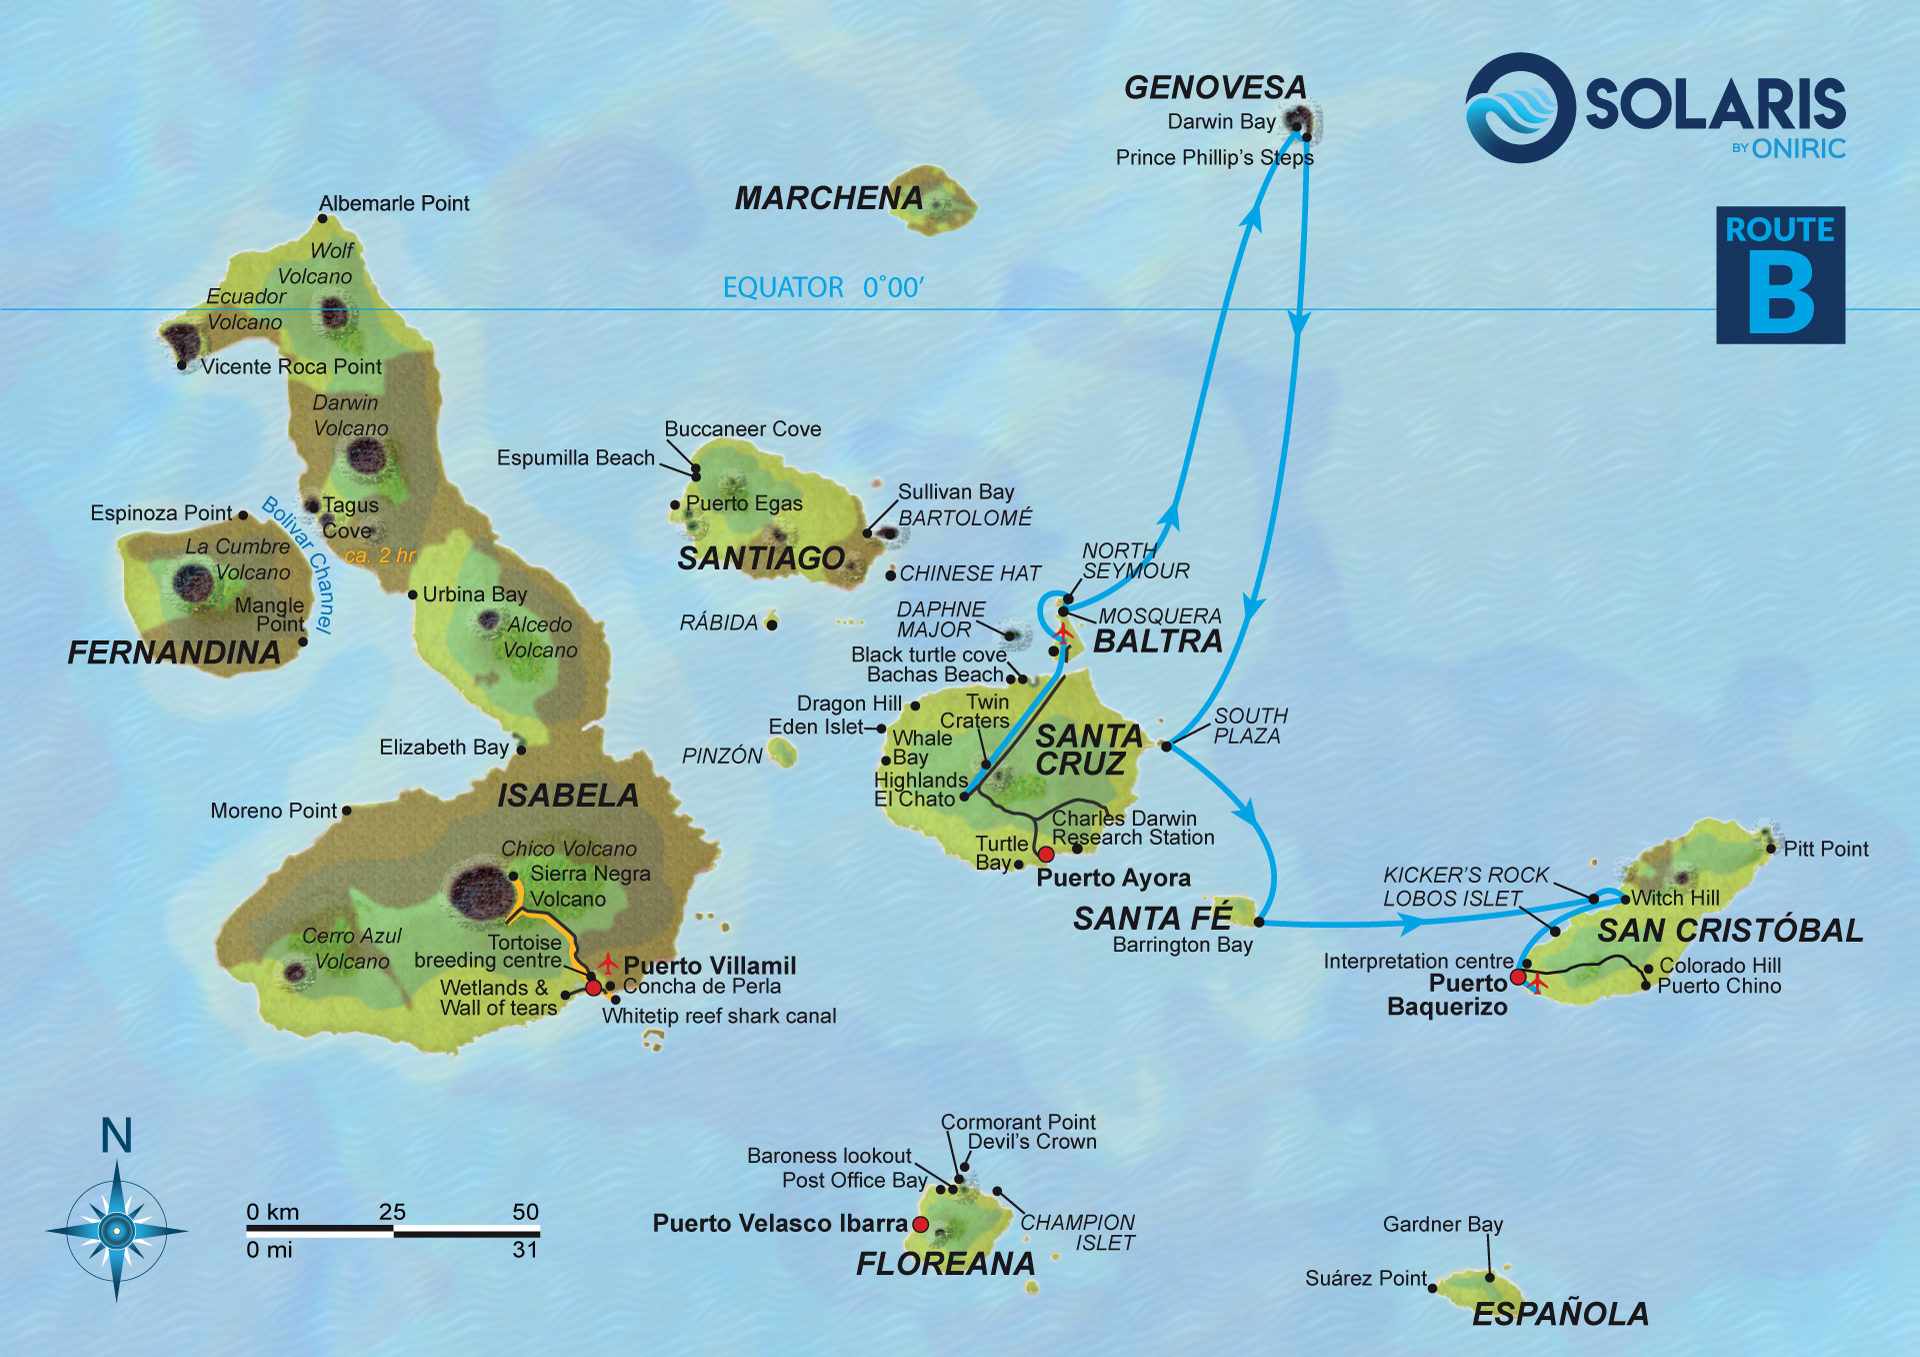 Galapagos Yacht M/Y Solaris Cruise Itinerary B route map